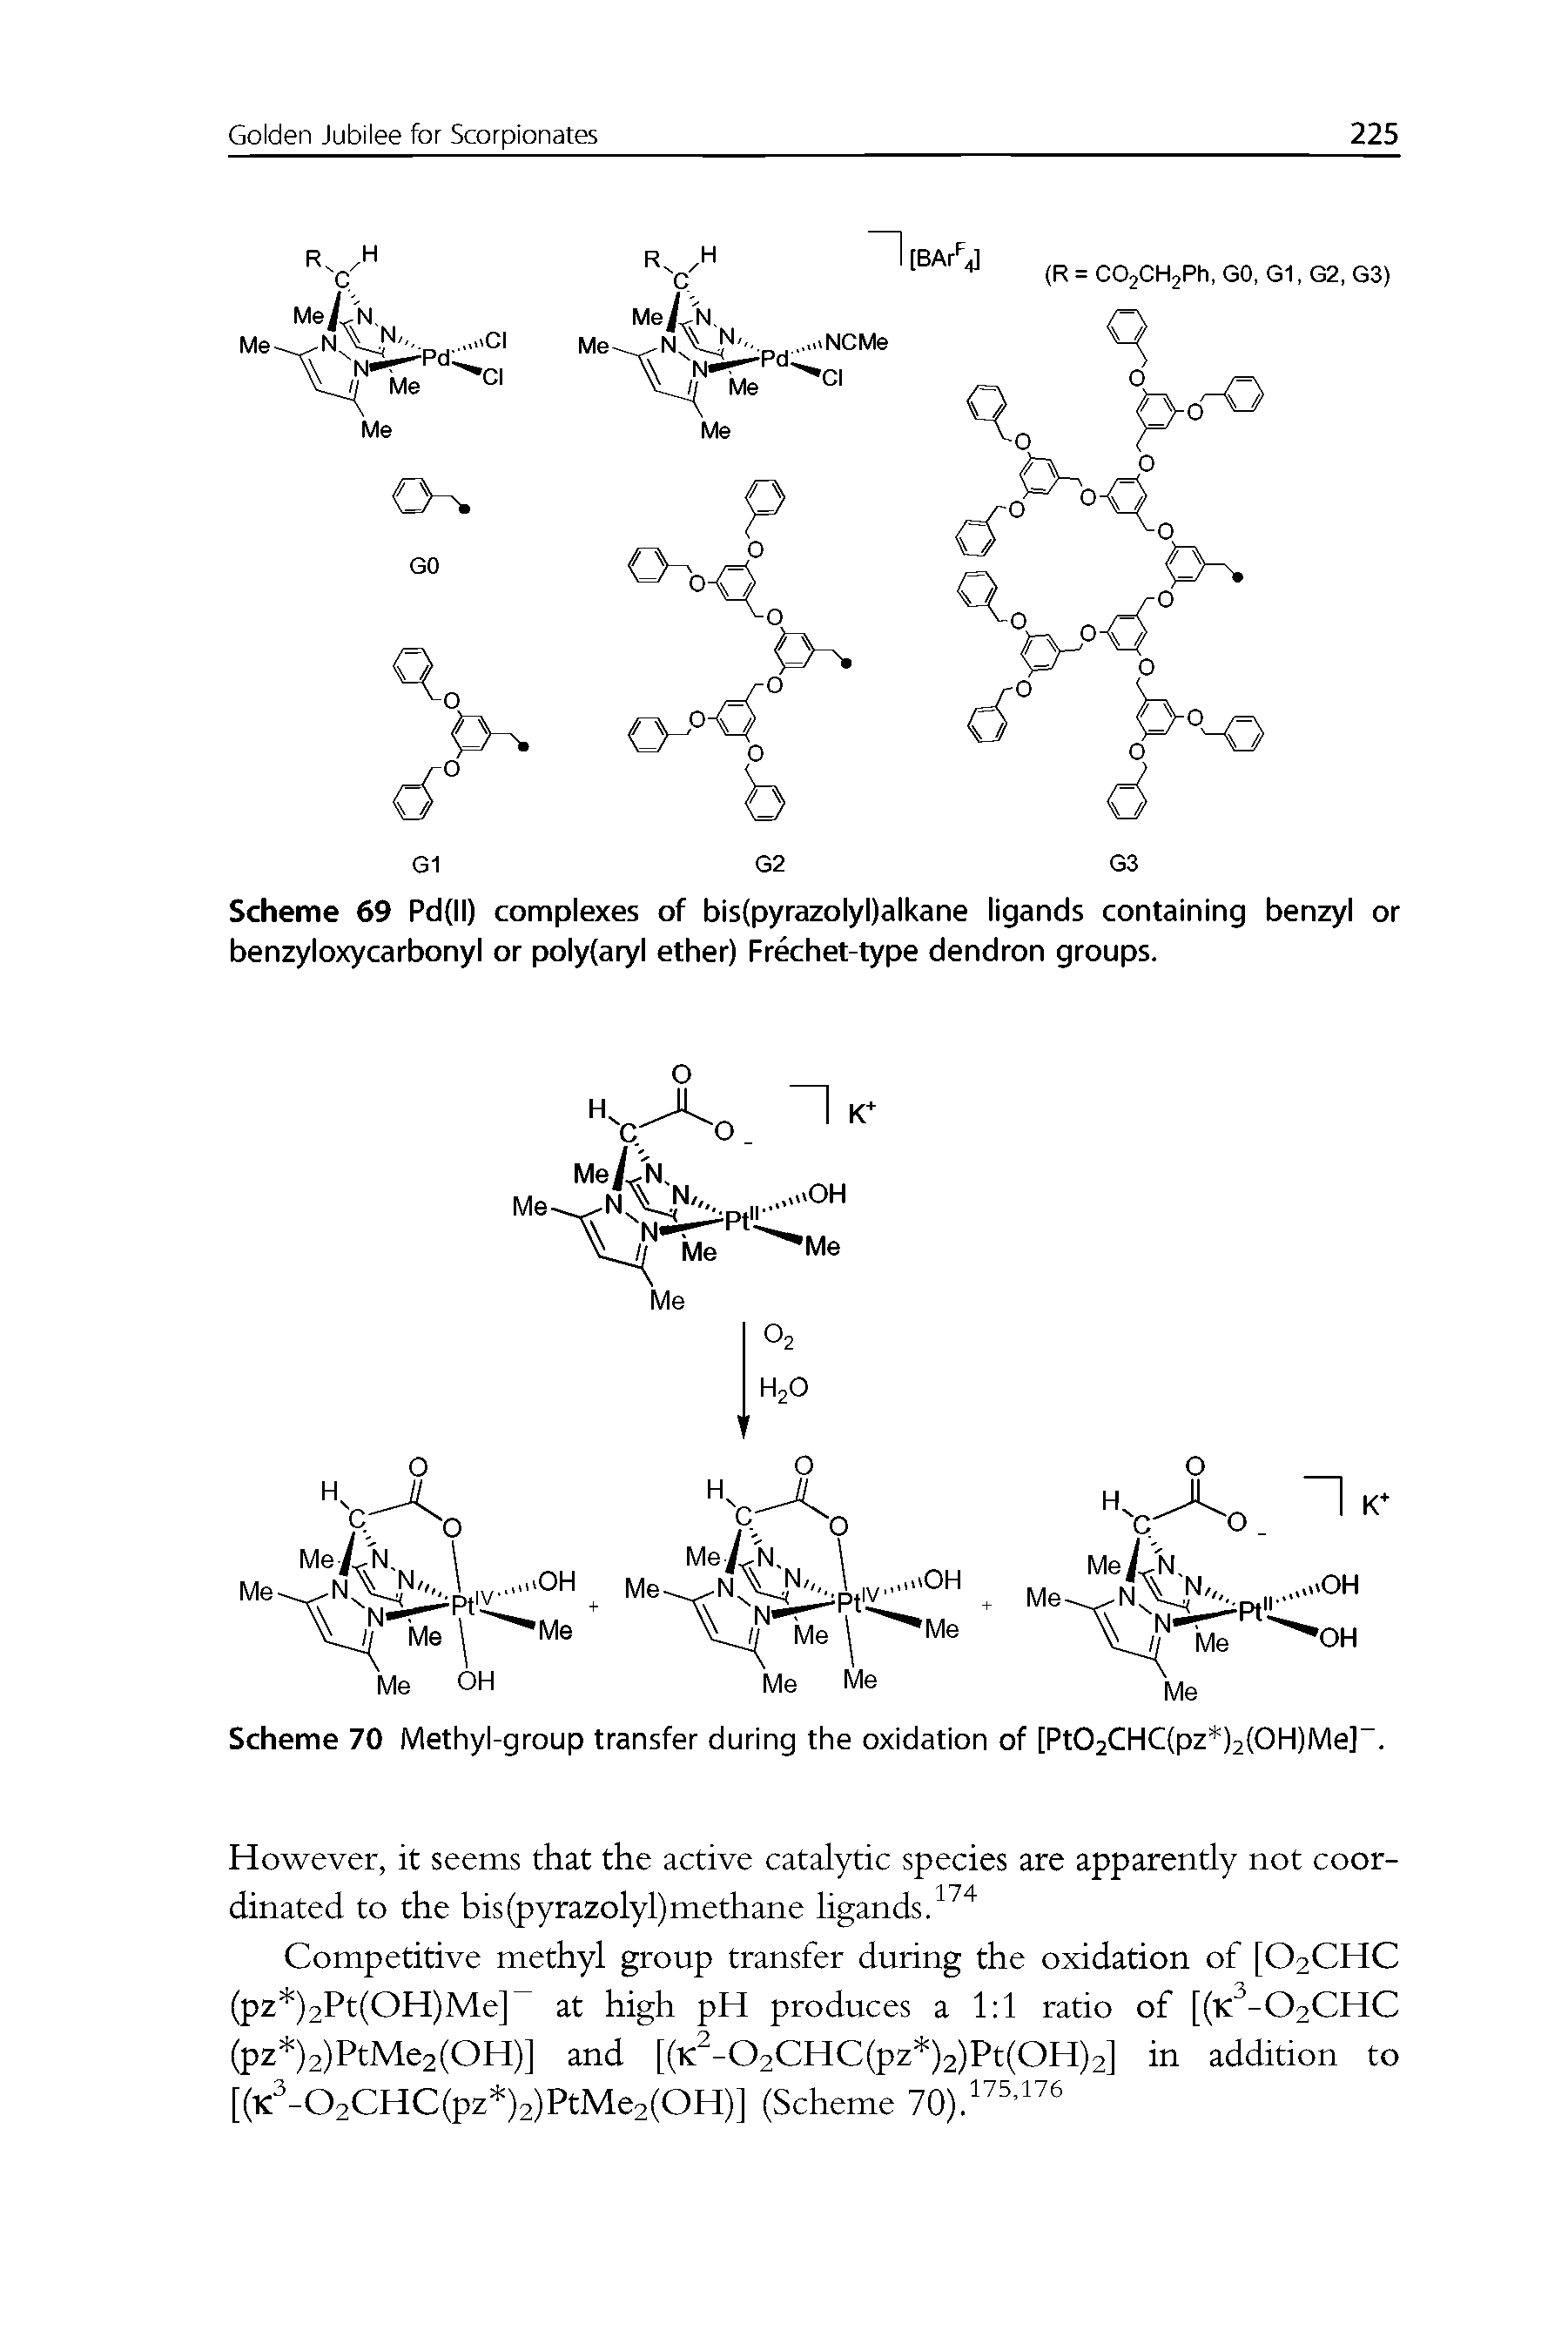 Scheme 69 Pd(ll) complexes of bis(pyrazolyl)alkane ligands containing benzyl or benzyloxycarbonyl or polyfaryl ether) Frechet-type dendron groups.